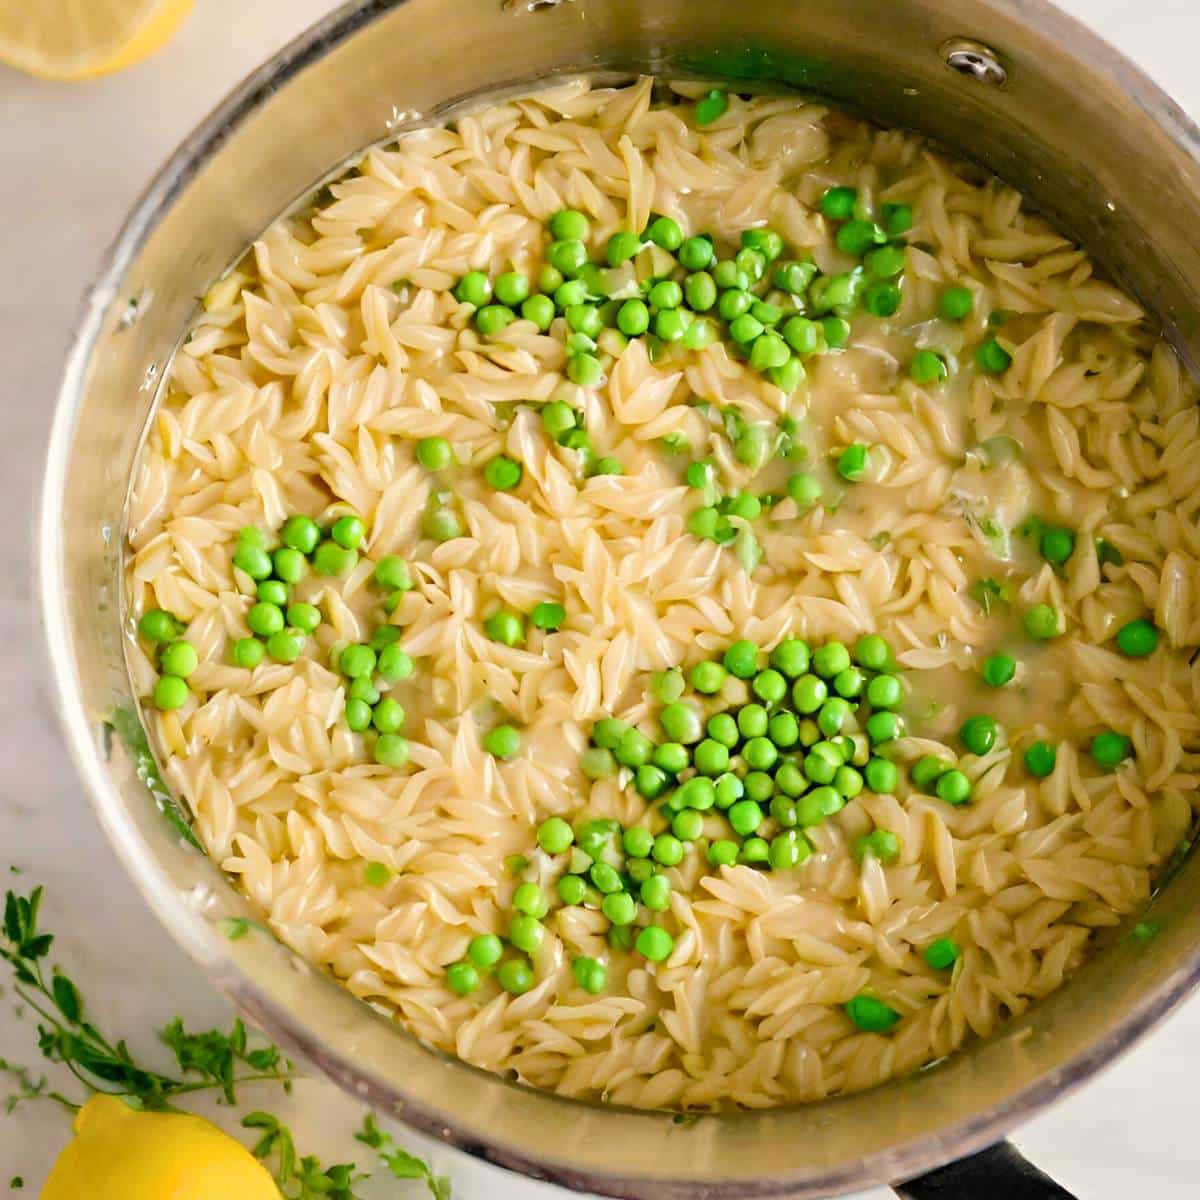 Orzo with peas in a pot.